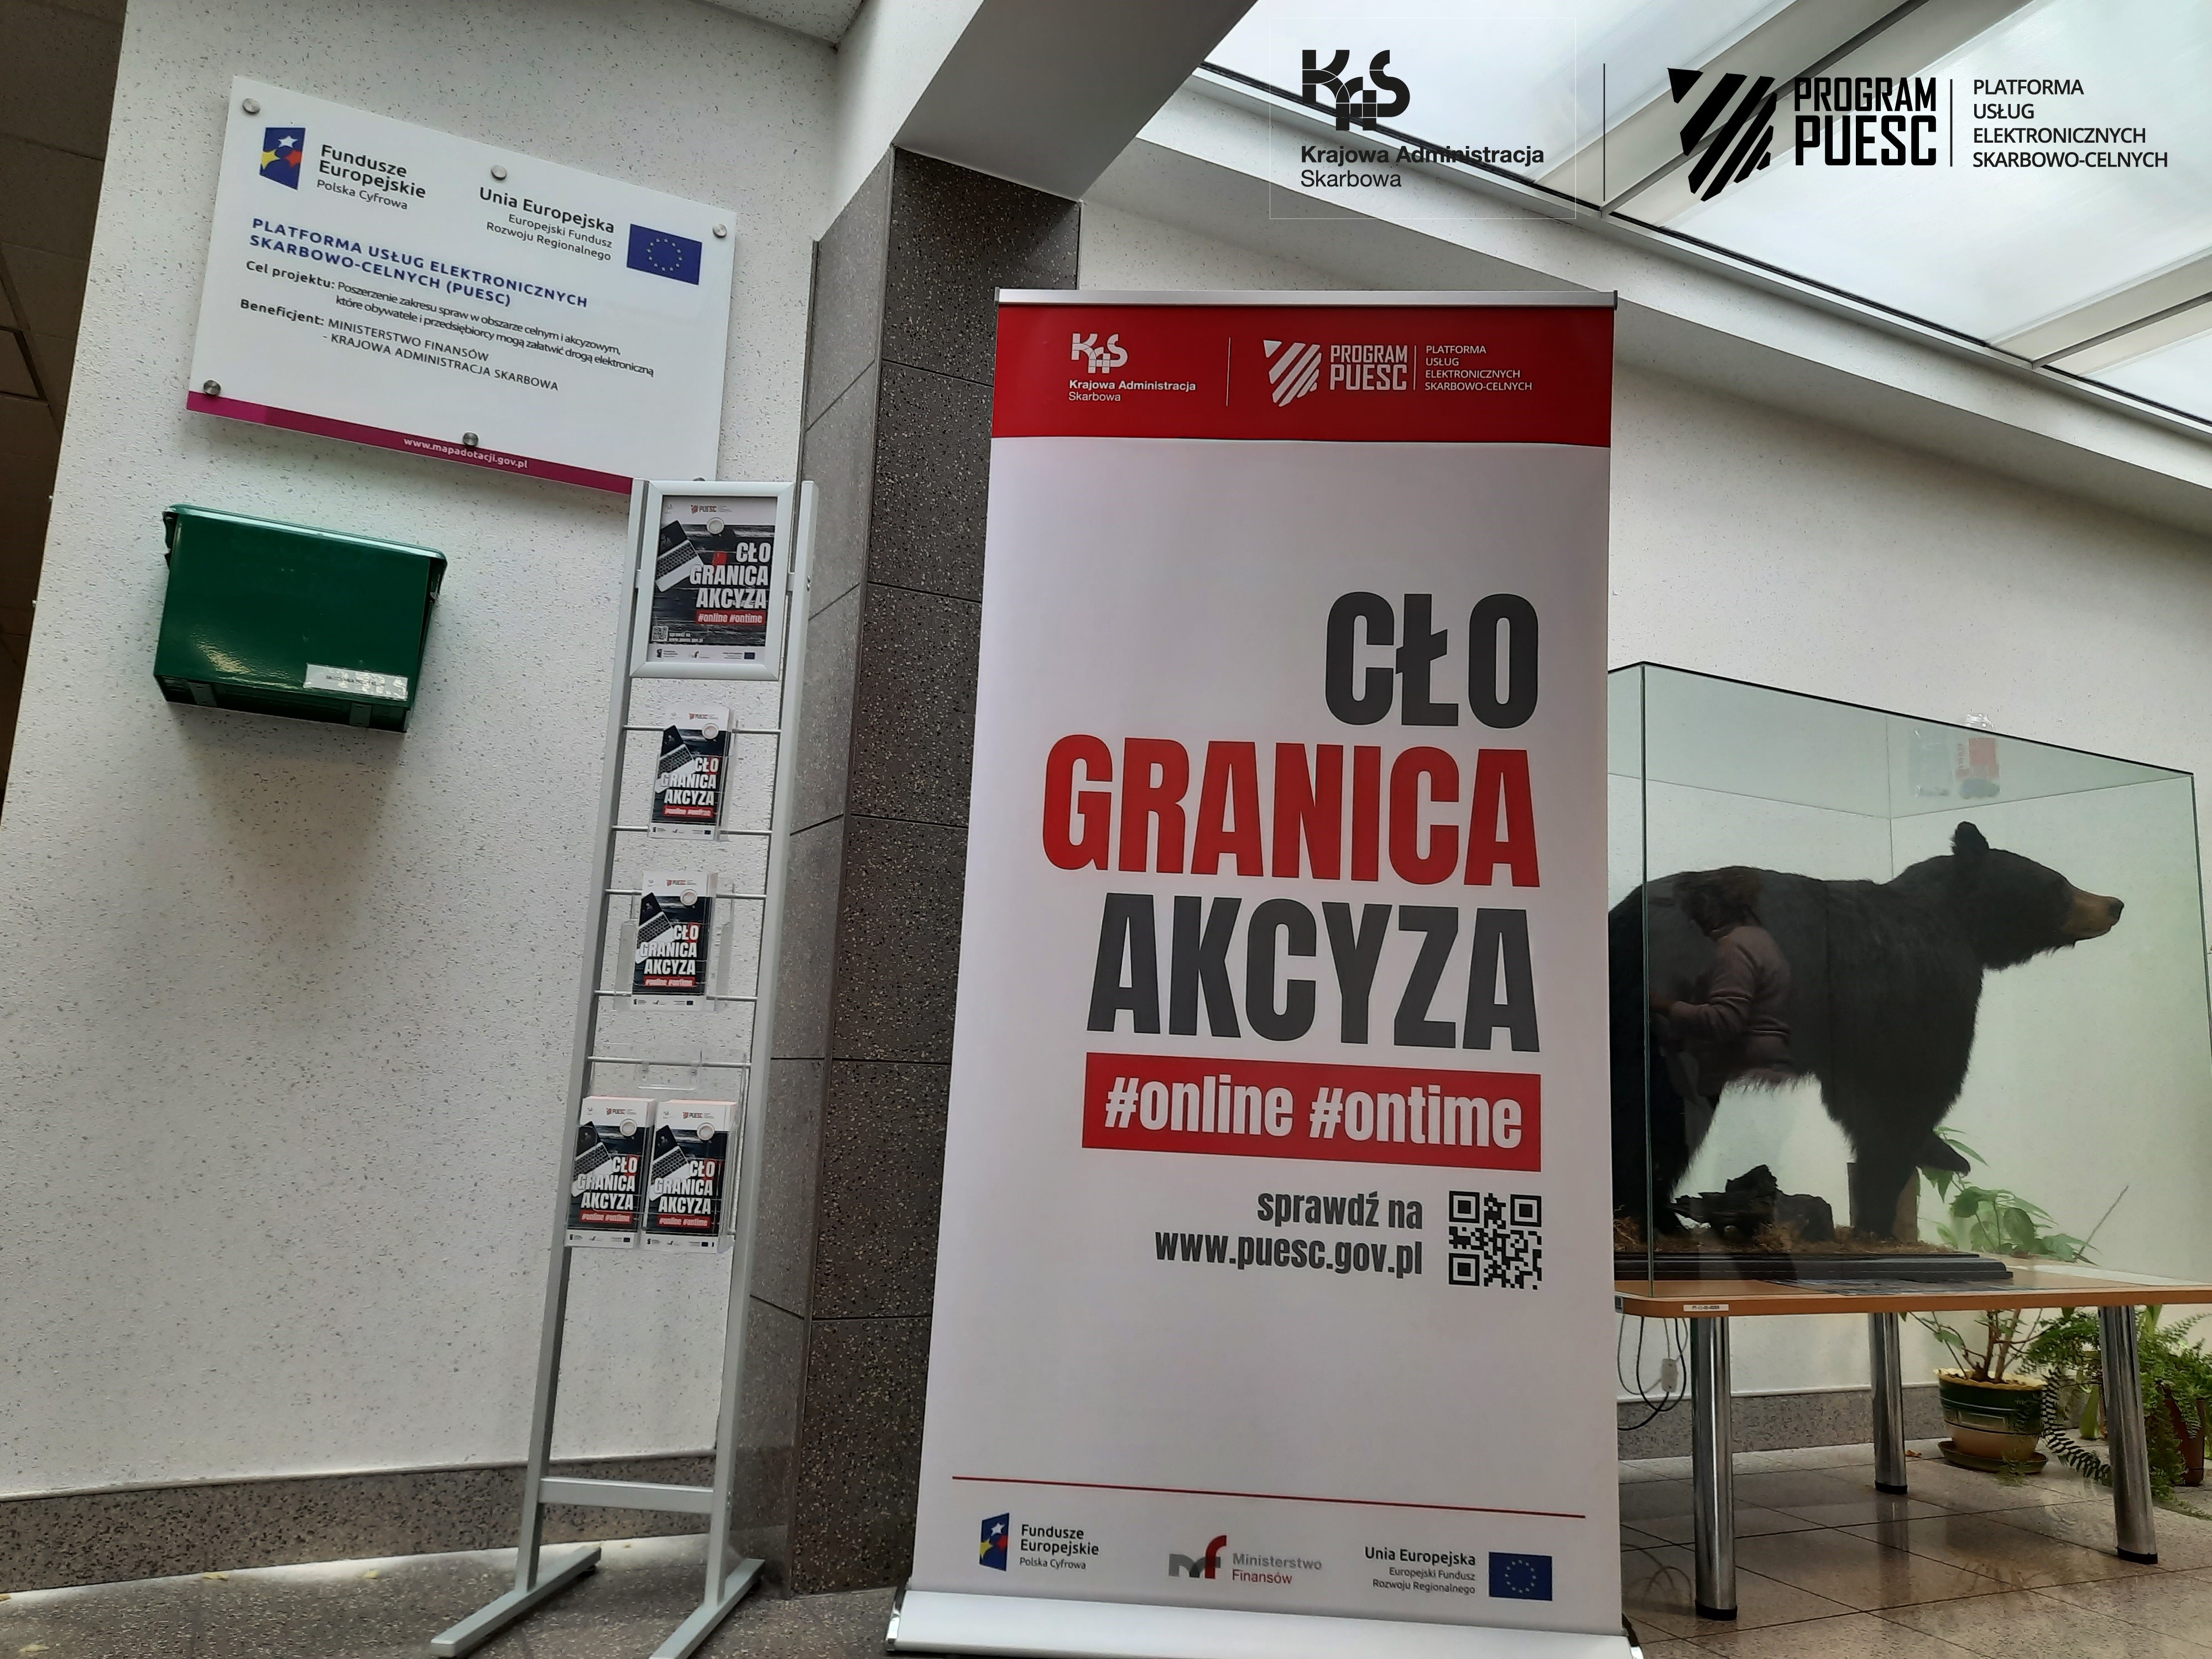 The interior of the Customs and Tax Control Office in Przemyśl. In the middle there is a roll-up with the words Cło, Granica, Excise. On the left, you can see a board informing about the implementation of the PUESC Project, with the following logos: National Revenue Administration, European Funds, Digital Poland, Tax and Customs Information System, Ministry of Finance, European Union, European Regional Development Fund. In the background, on the right, there is a model of a brown bear.